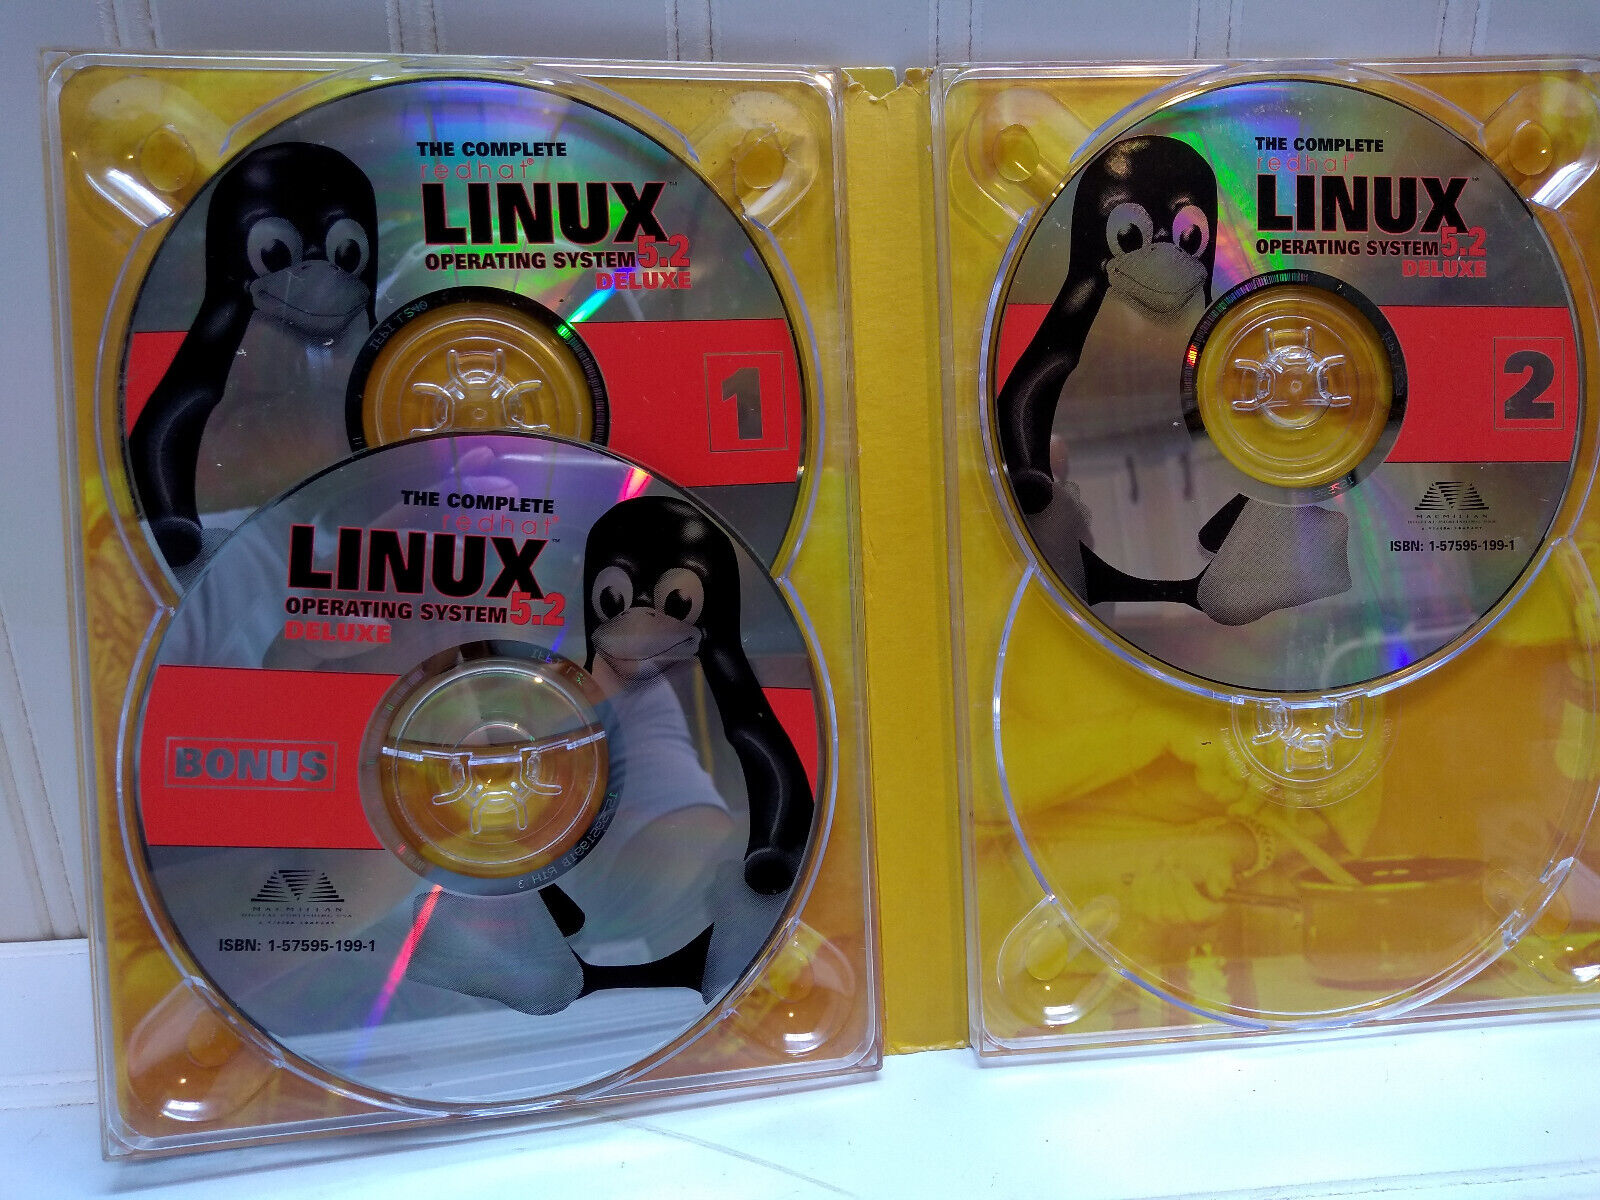 Red Hat The Complete Linux Operating System Deluxe 5.2 (3discs)